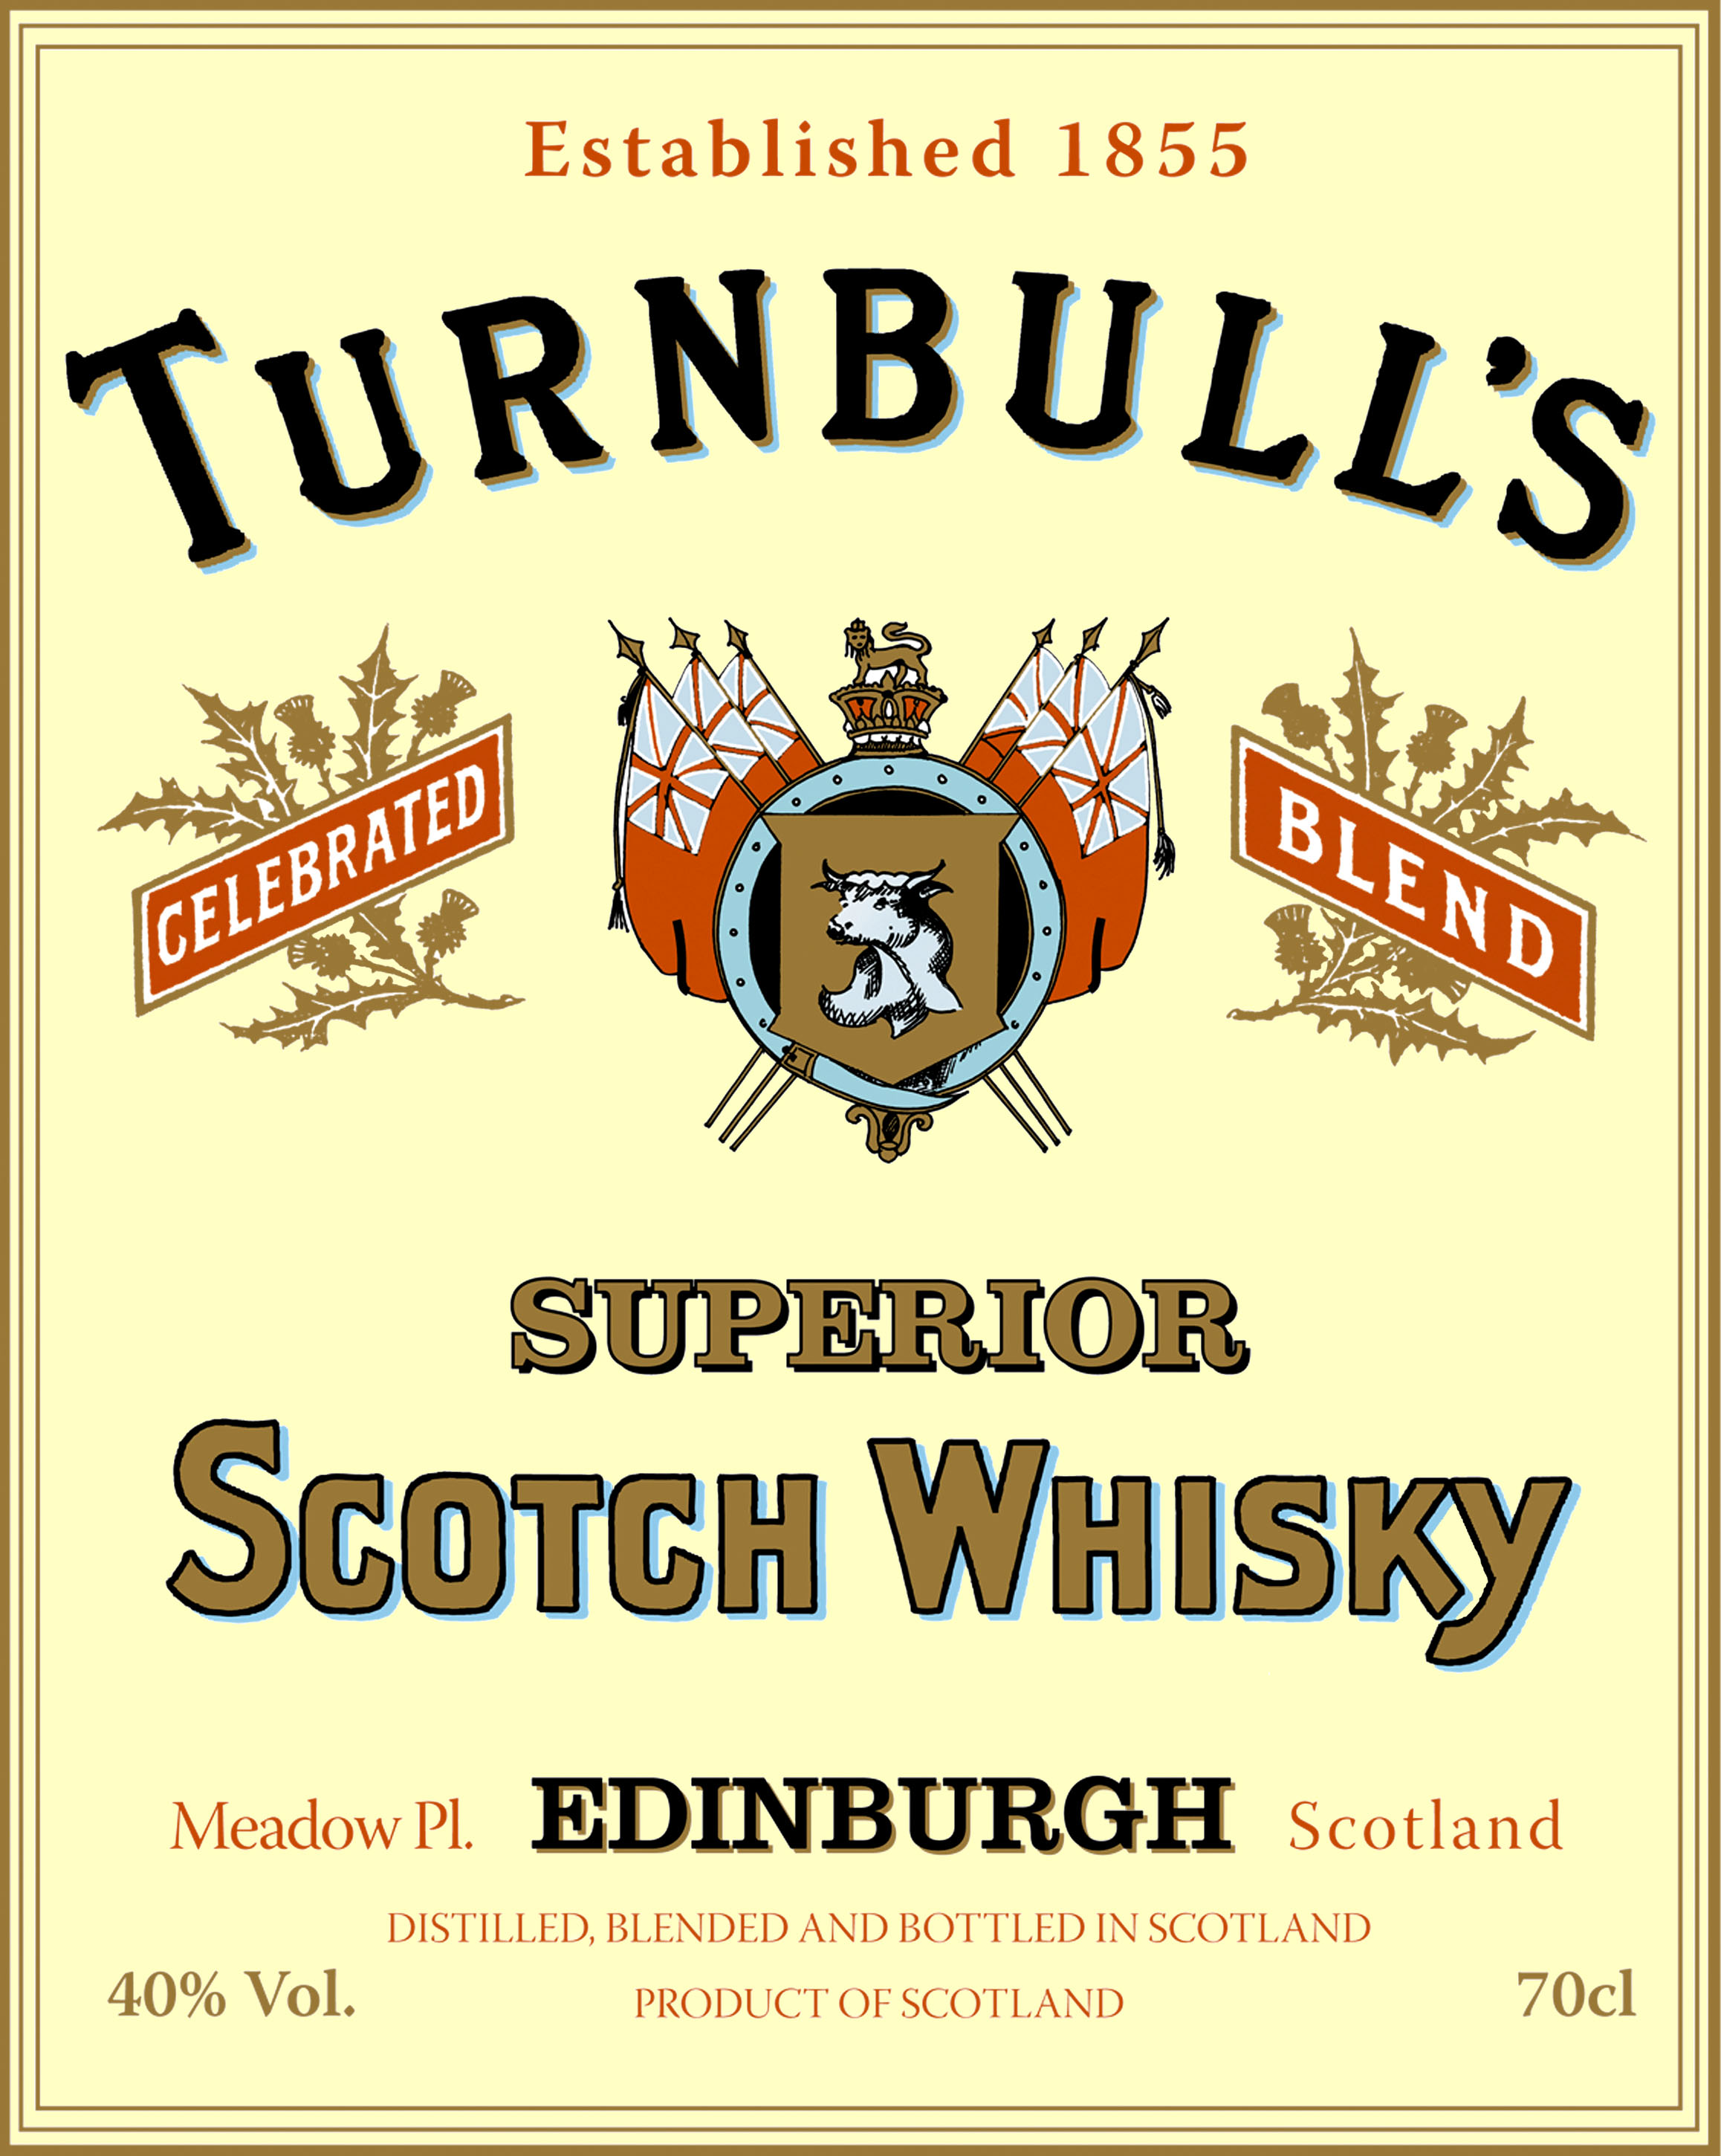 Turnbull's special scotch whisky retro vintage style metal wall plaque sign